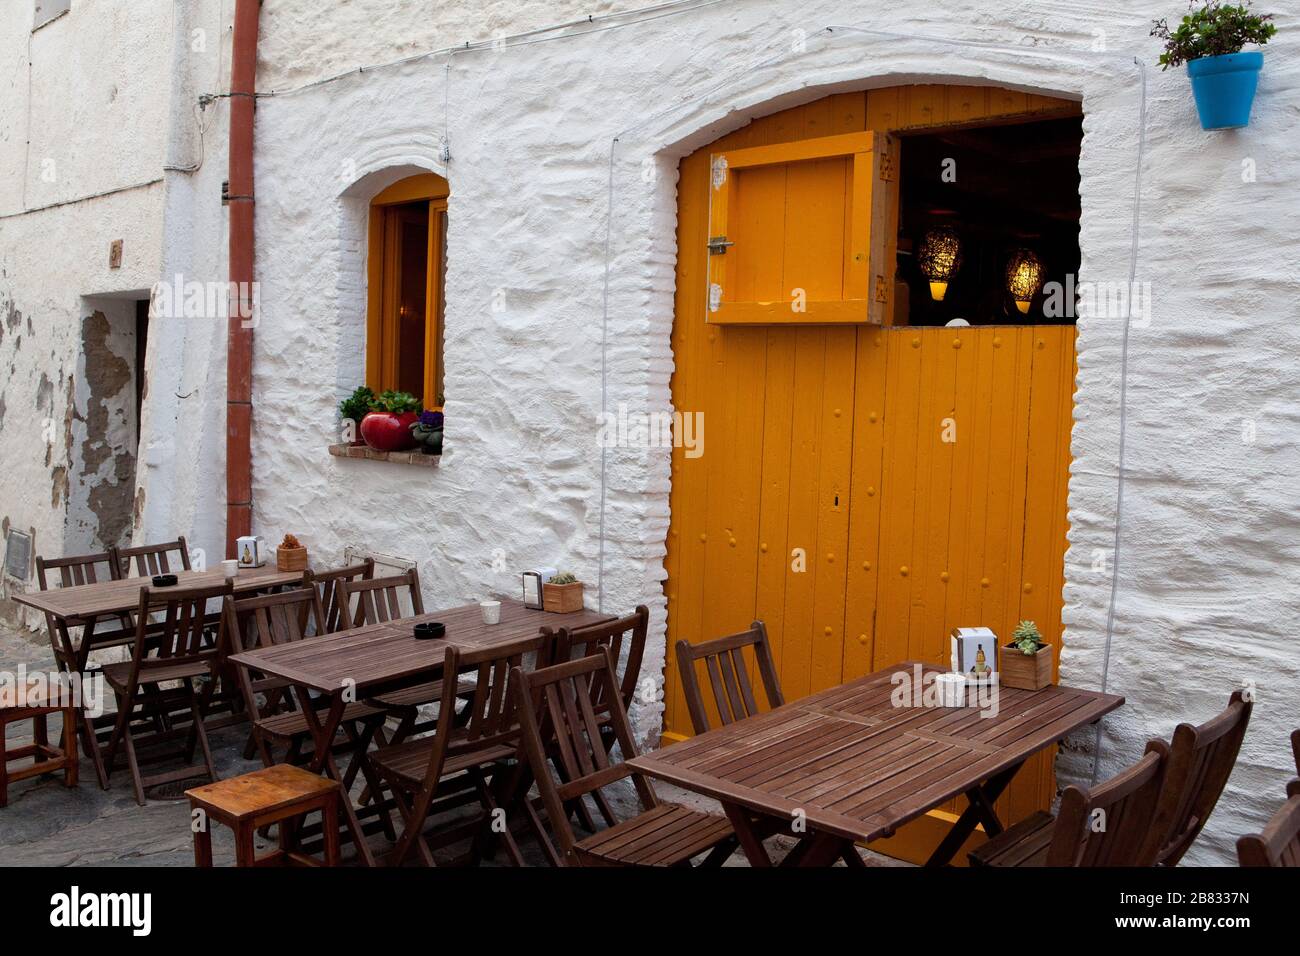 A typical restaurant in the village of Cadaques, Girona, Spain. Stock Photo